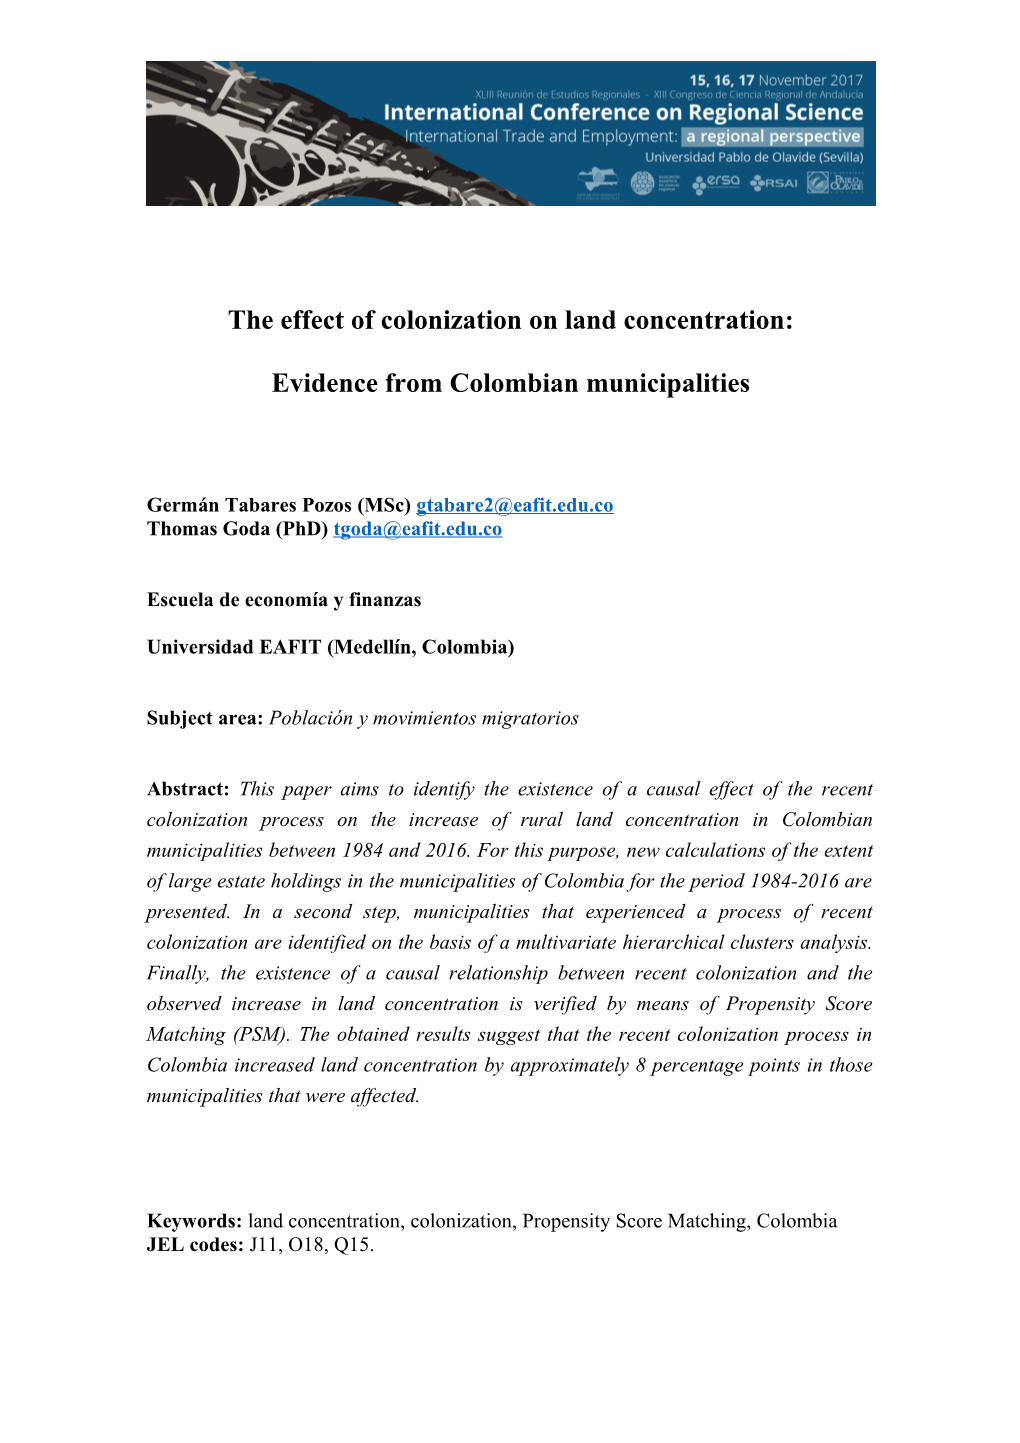 The Effect of Colonization on Land Concentration: Evidence from Colombian Municipalities